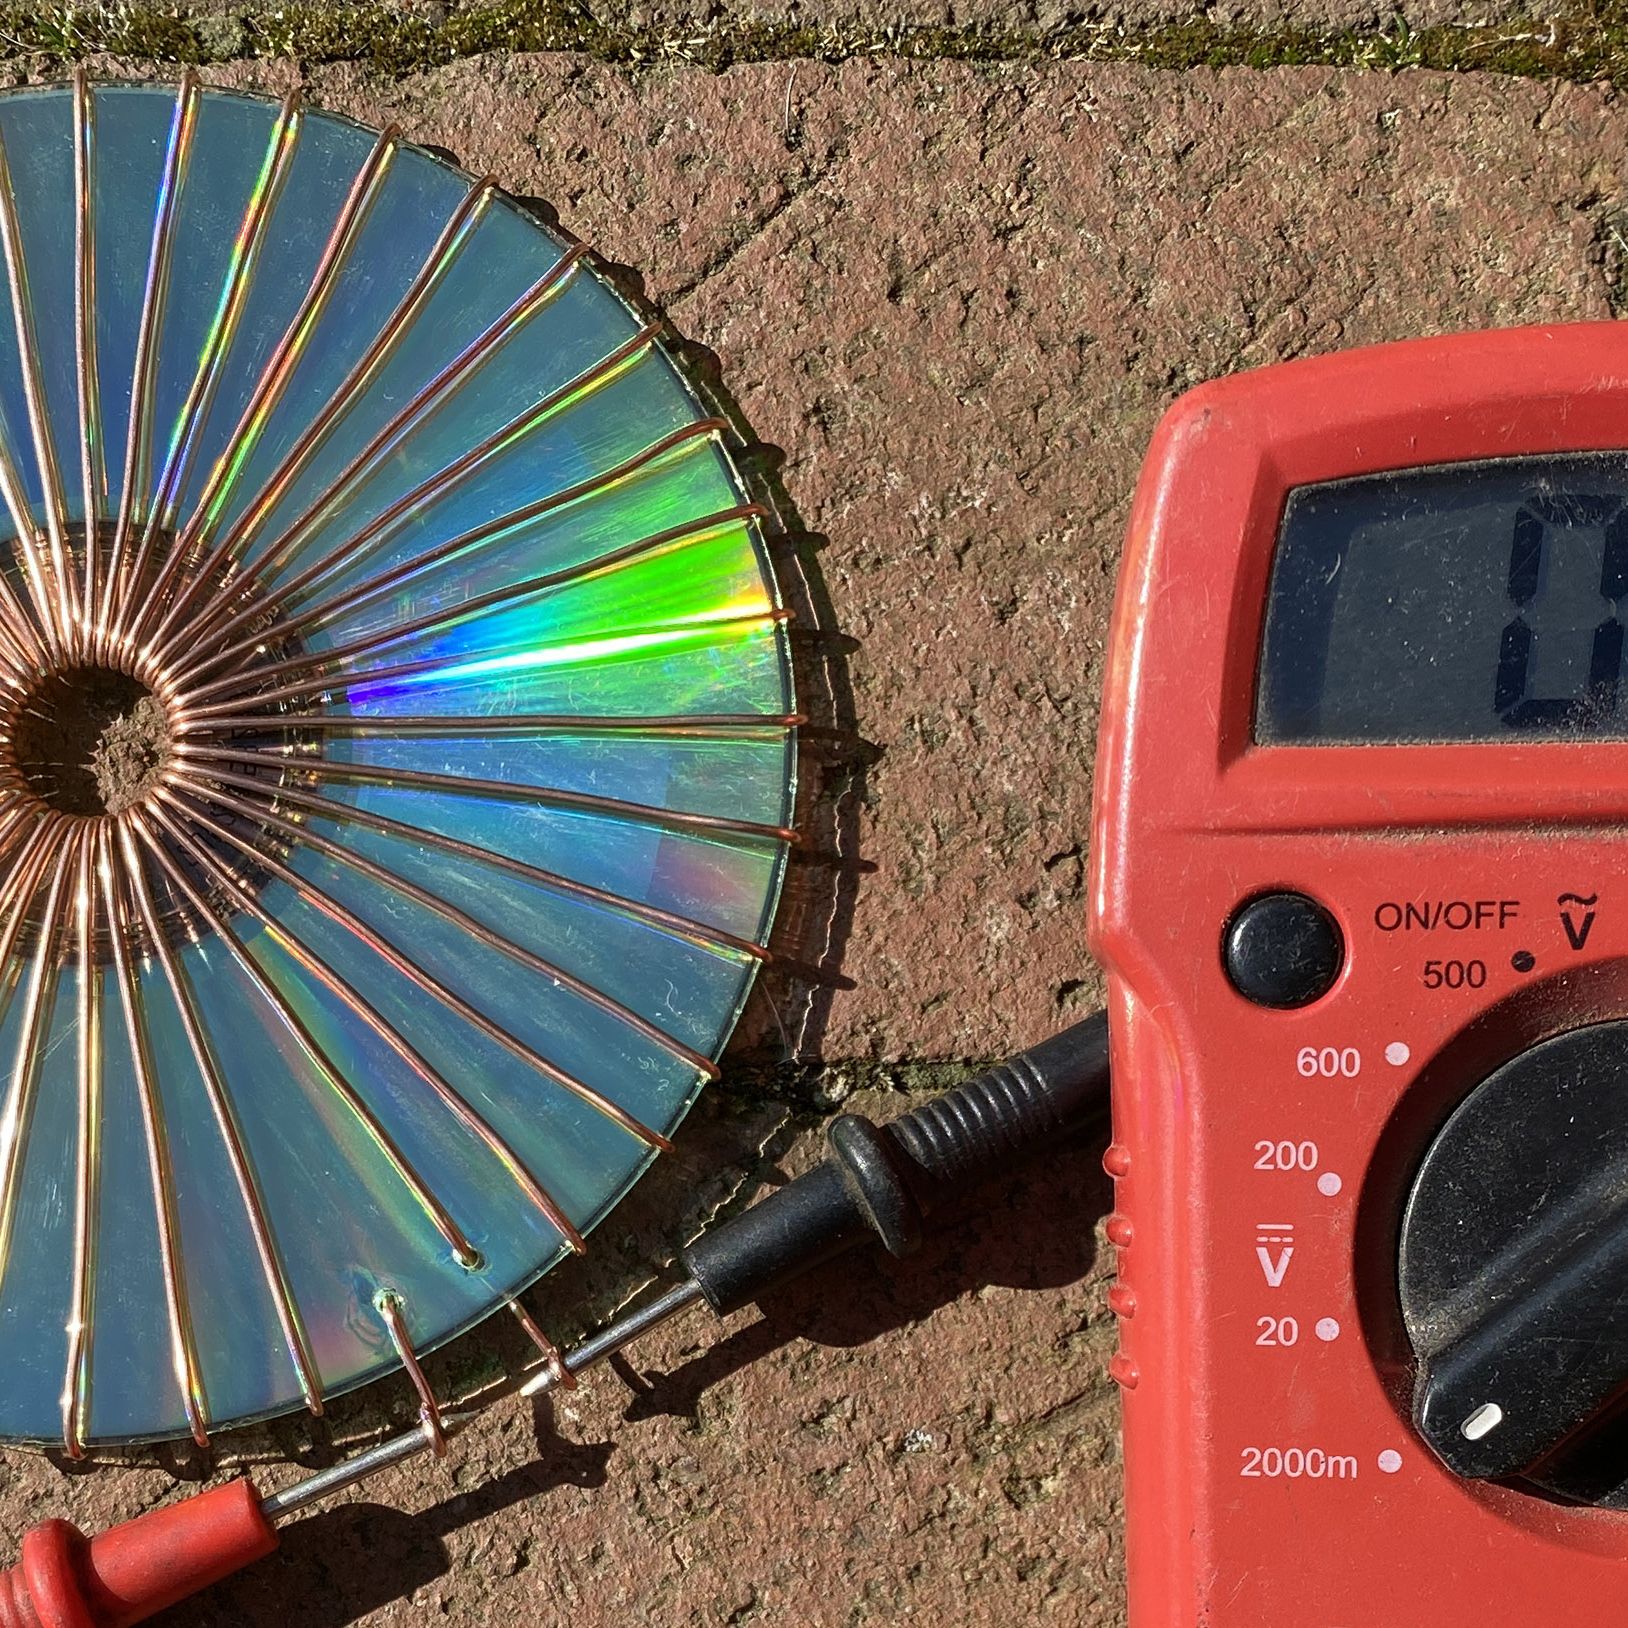 Can You Really Make a Solar Panel Using Old CDs?